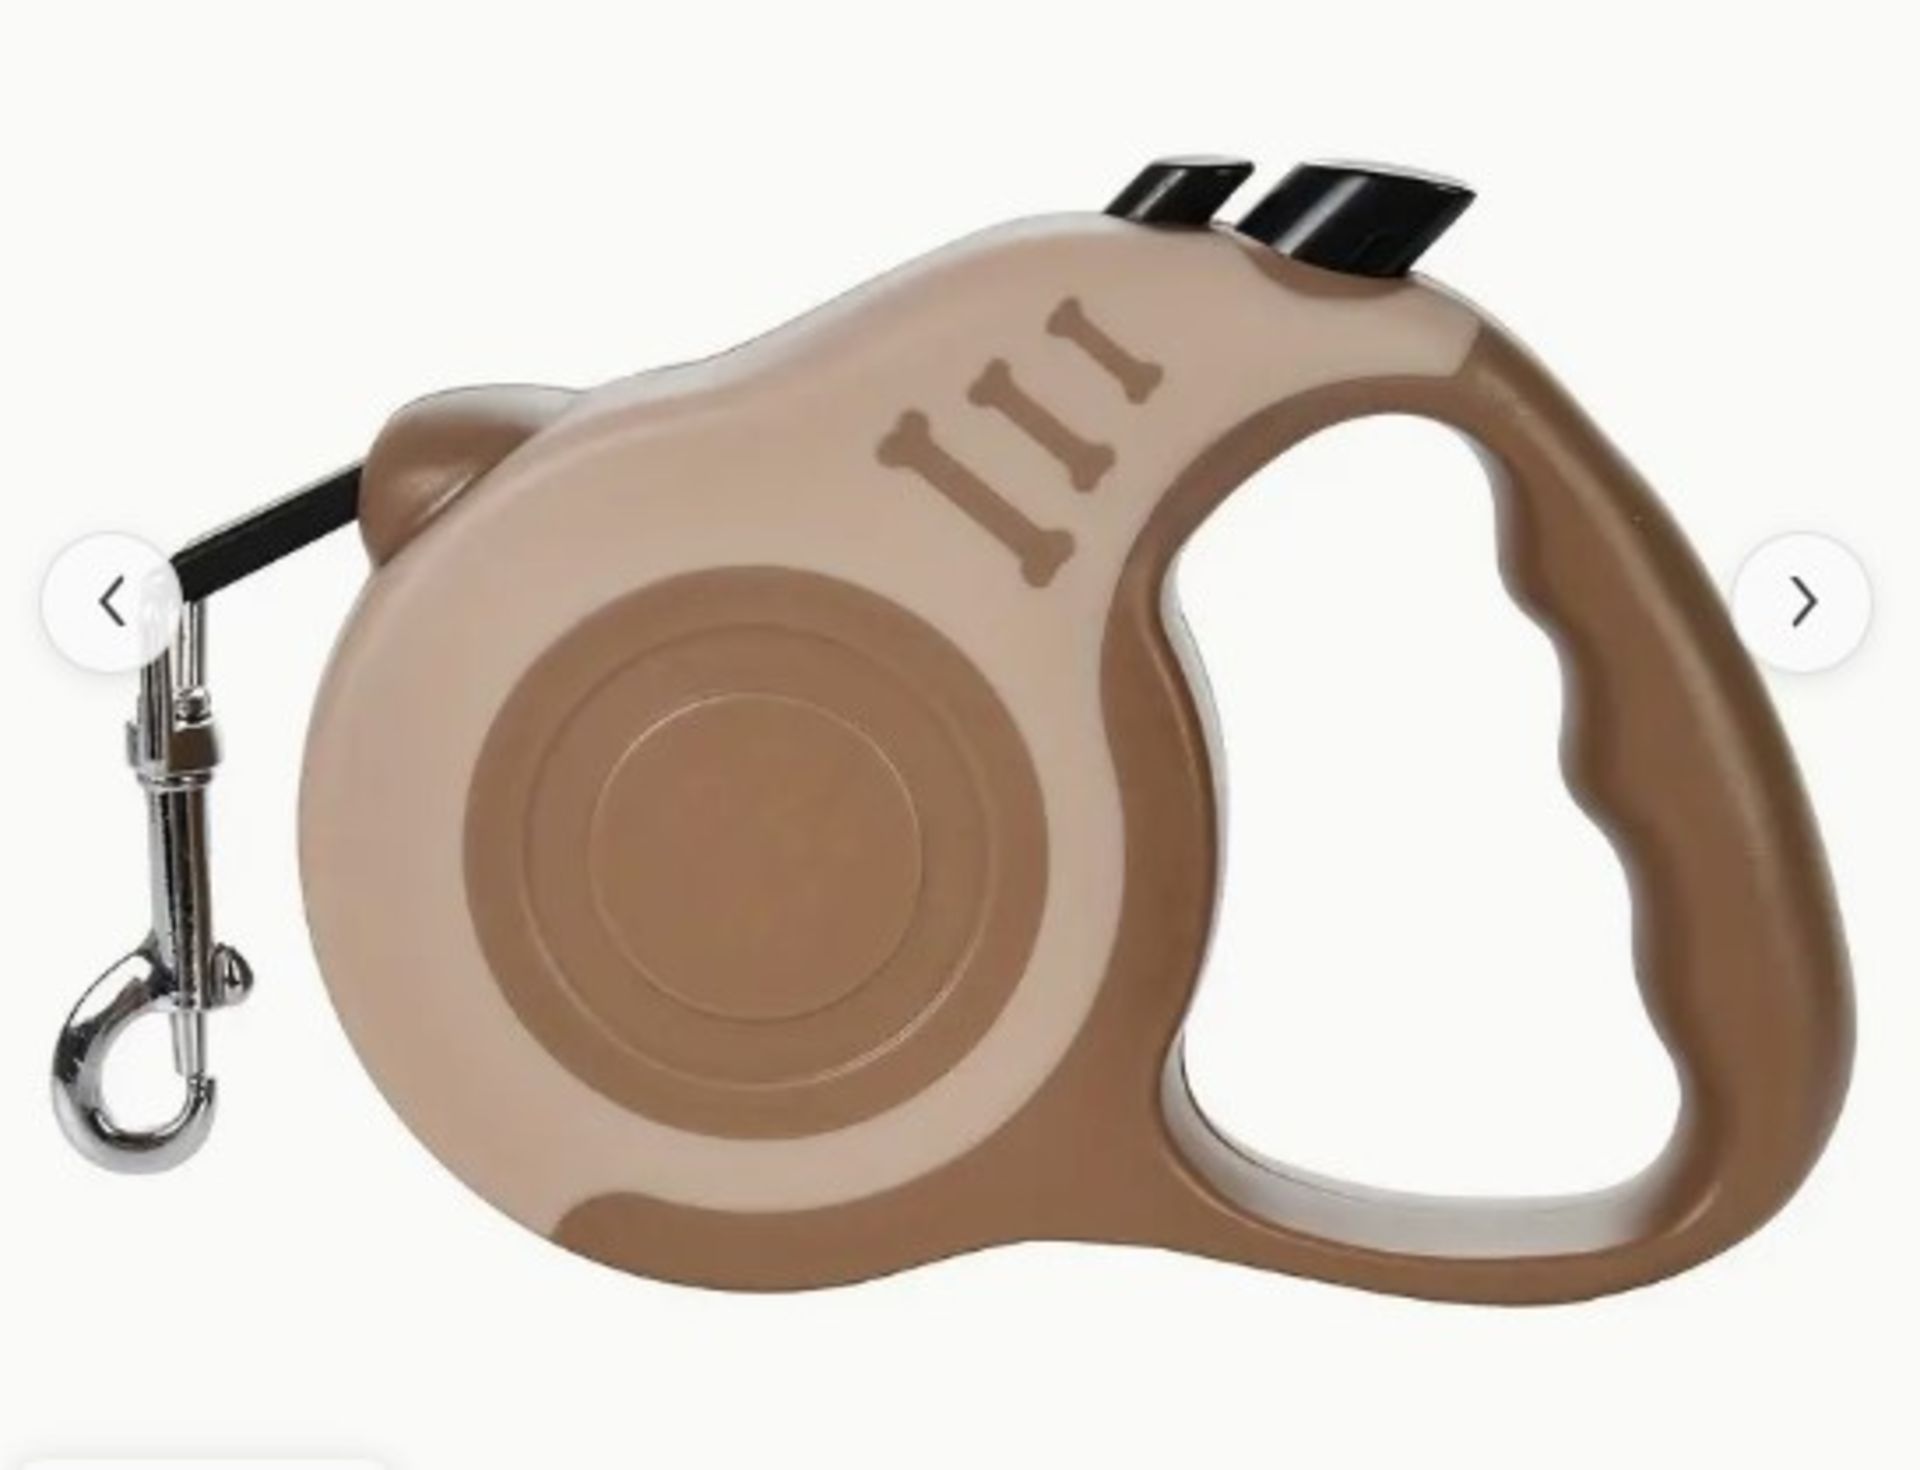 Durable Double Switch Retractable Pet Leash For Dogs